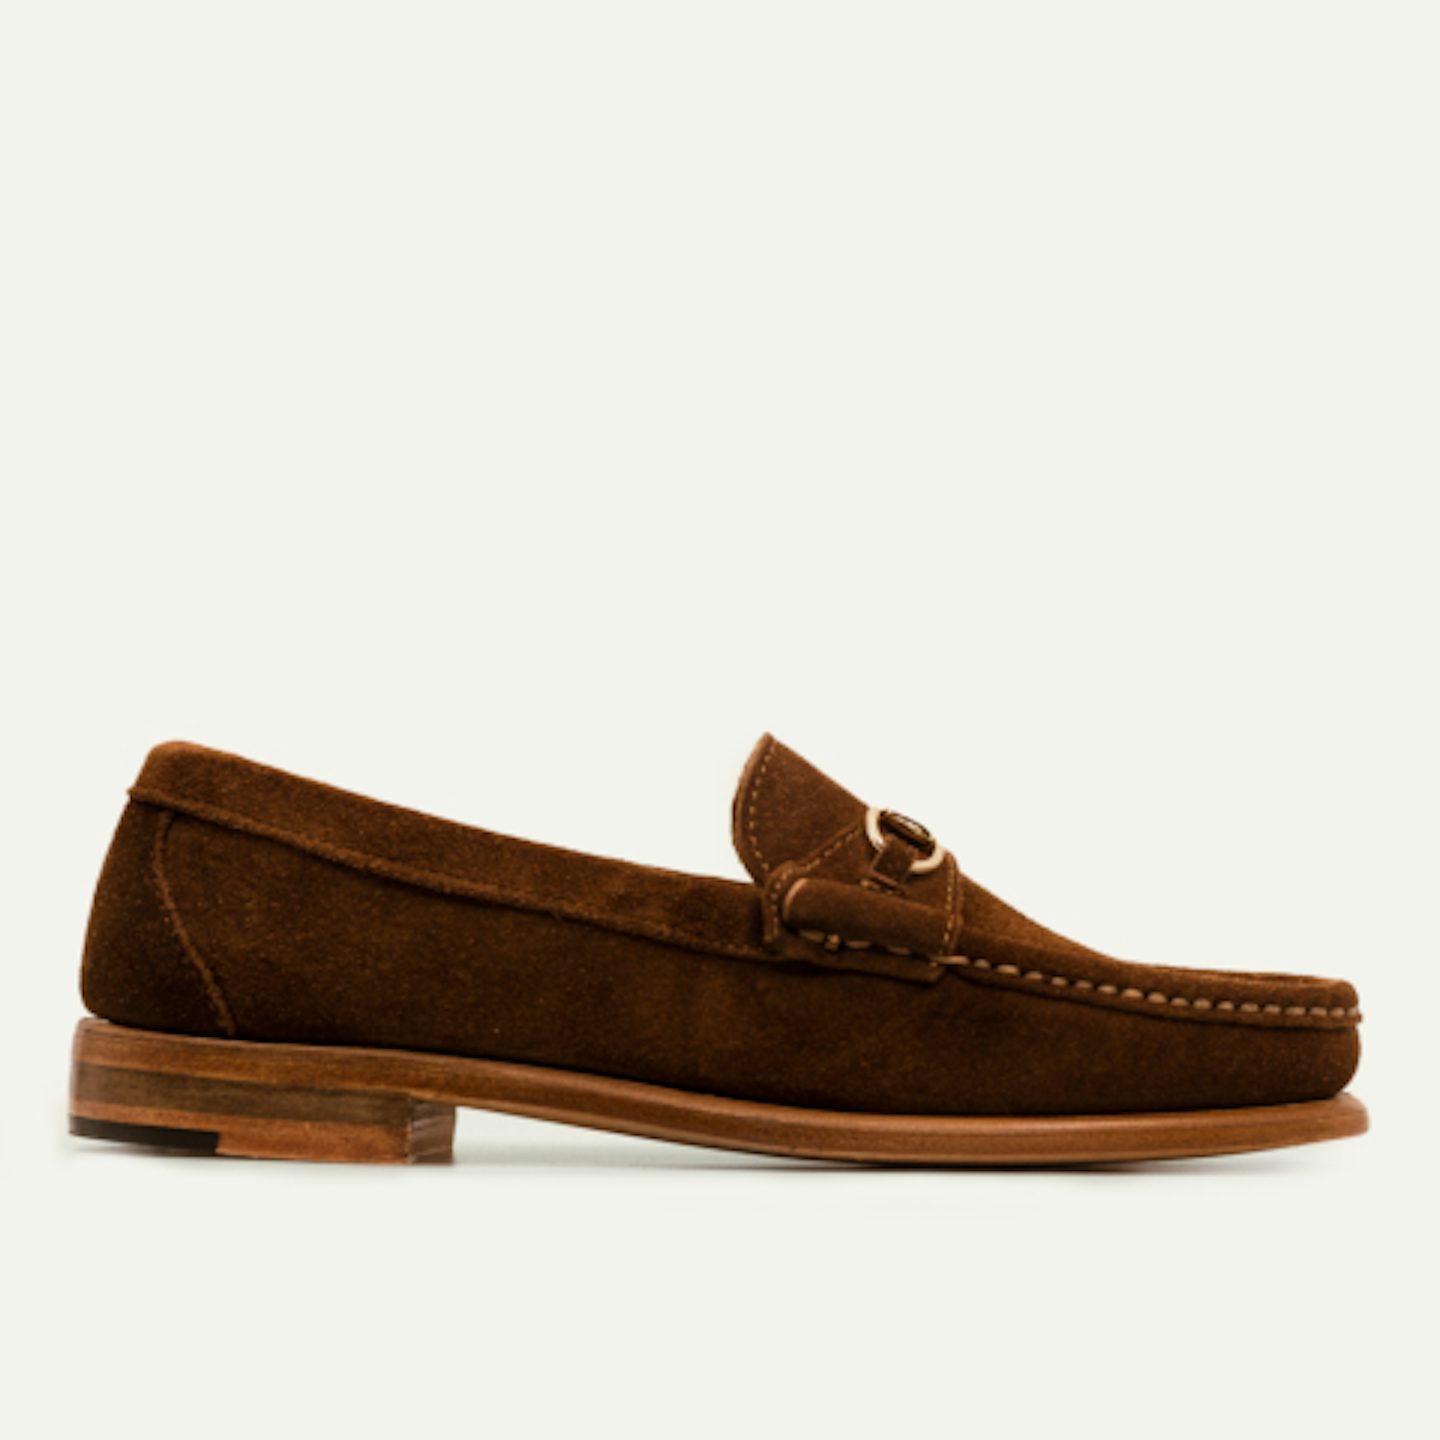 Bit Loafer - Snuff Repello Suede, Leather Sole with Dovetail ...